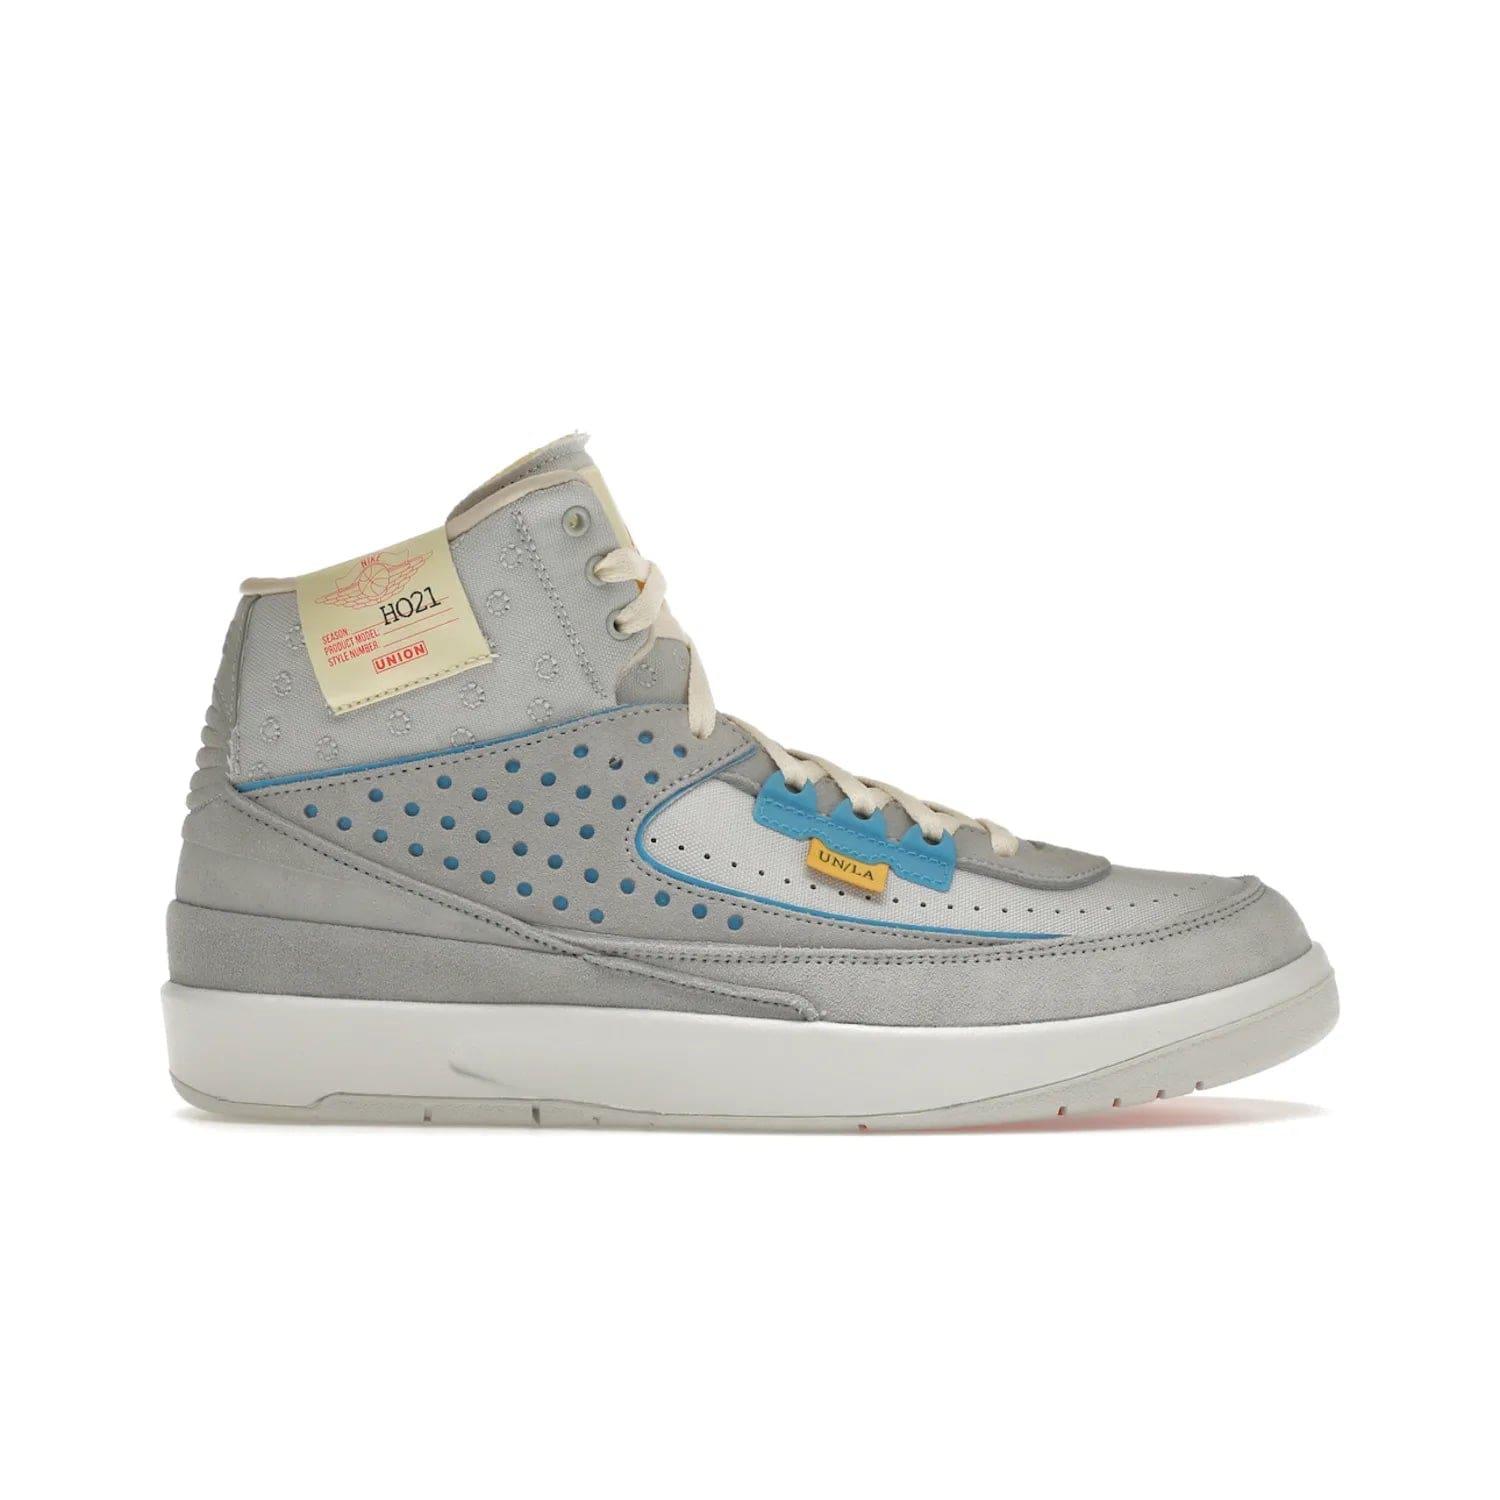 Jordan 2 Retro SP Union Grey Fog - Image 1 - Only at www.BallersClubKickz.com - Introducing the Air Jordan 2 Retro SP Union Grey Fog. This intricate sneaker design features a grey canvas upper with light blue eyelets, eyestay patches, and piping, plus custom external tags. Dropping in April 2022, this exclusive release offers a worn-in look and feel.